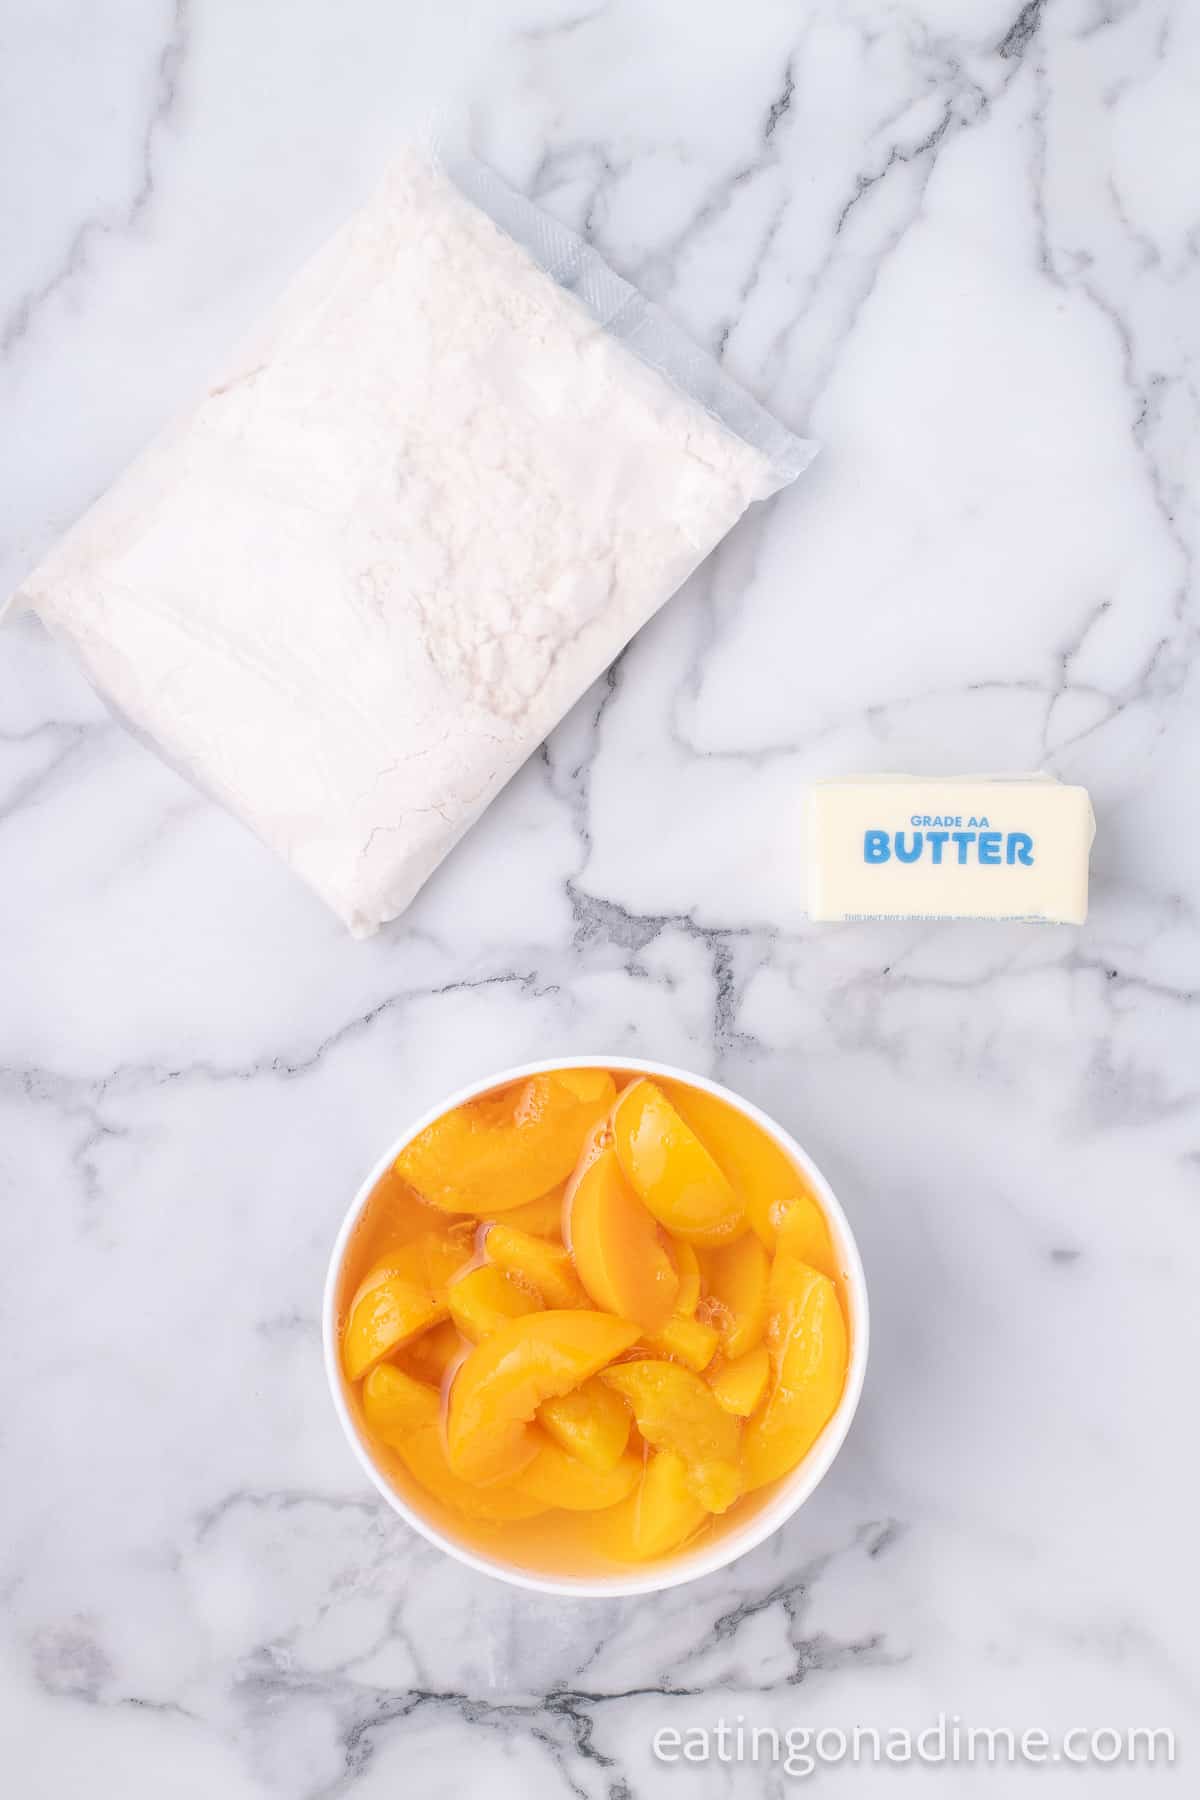 Ingredients for Crock Pot Peach Dump Cake: Canned peaches in Heavy Syrup, Yellow Cake Mix and Butter